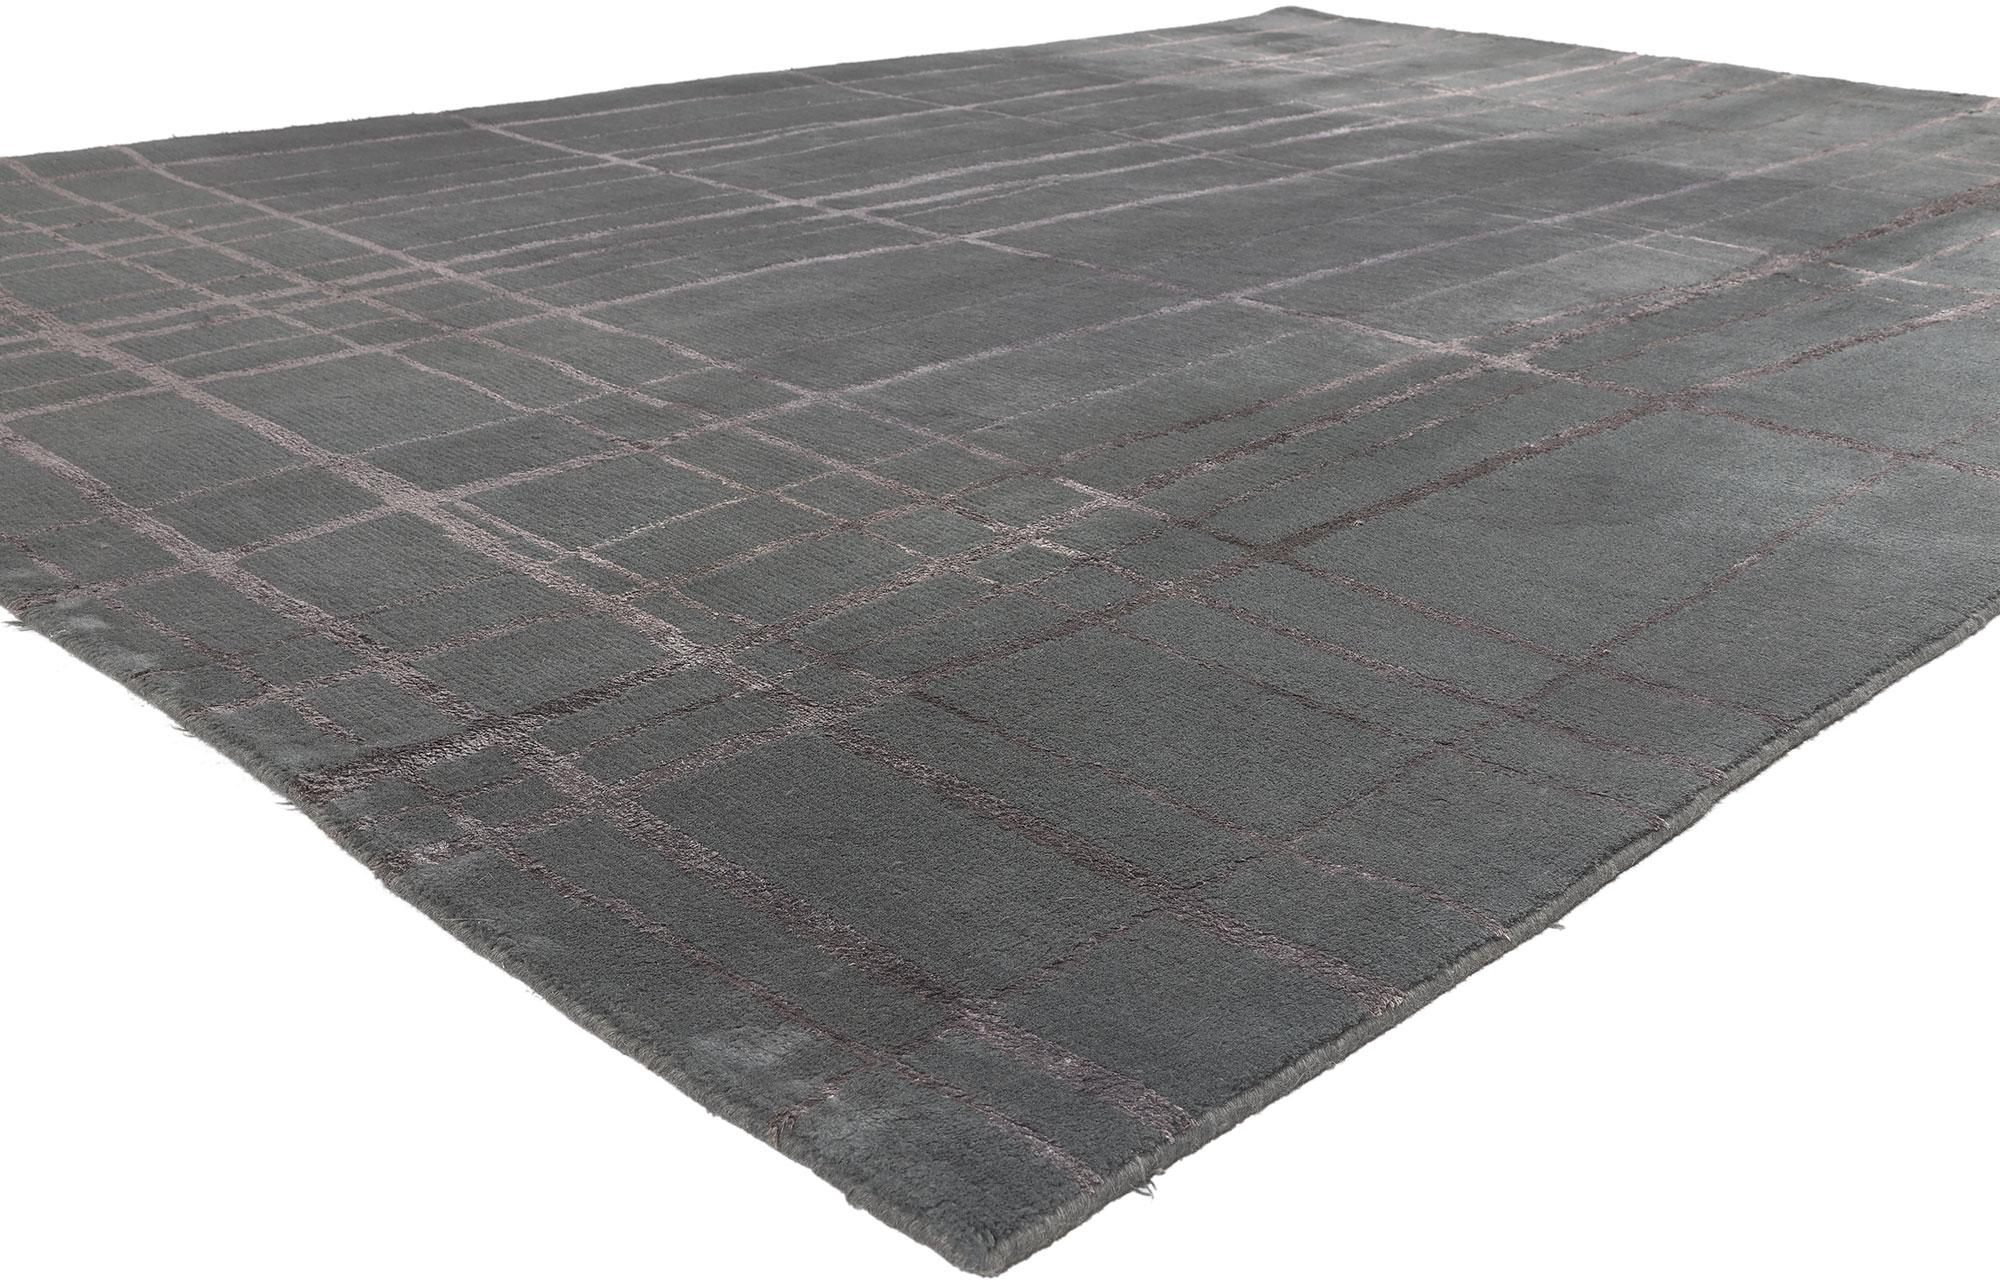 77308 Dark Gray Wool & Silk Tibetan Rug, 08'07 x 11'04.
Abstract Expressionism meets esoteric elegance in this hand knotted wool and silk vintage Tibetan rug. The abstract linear design and monochromatic color scheme woven into this piece work